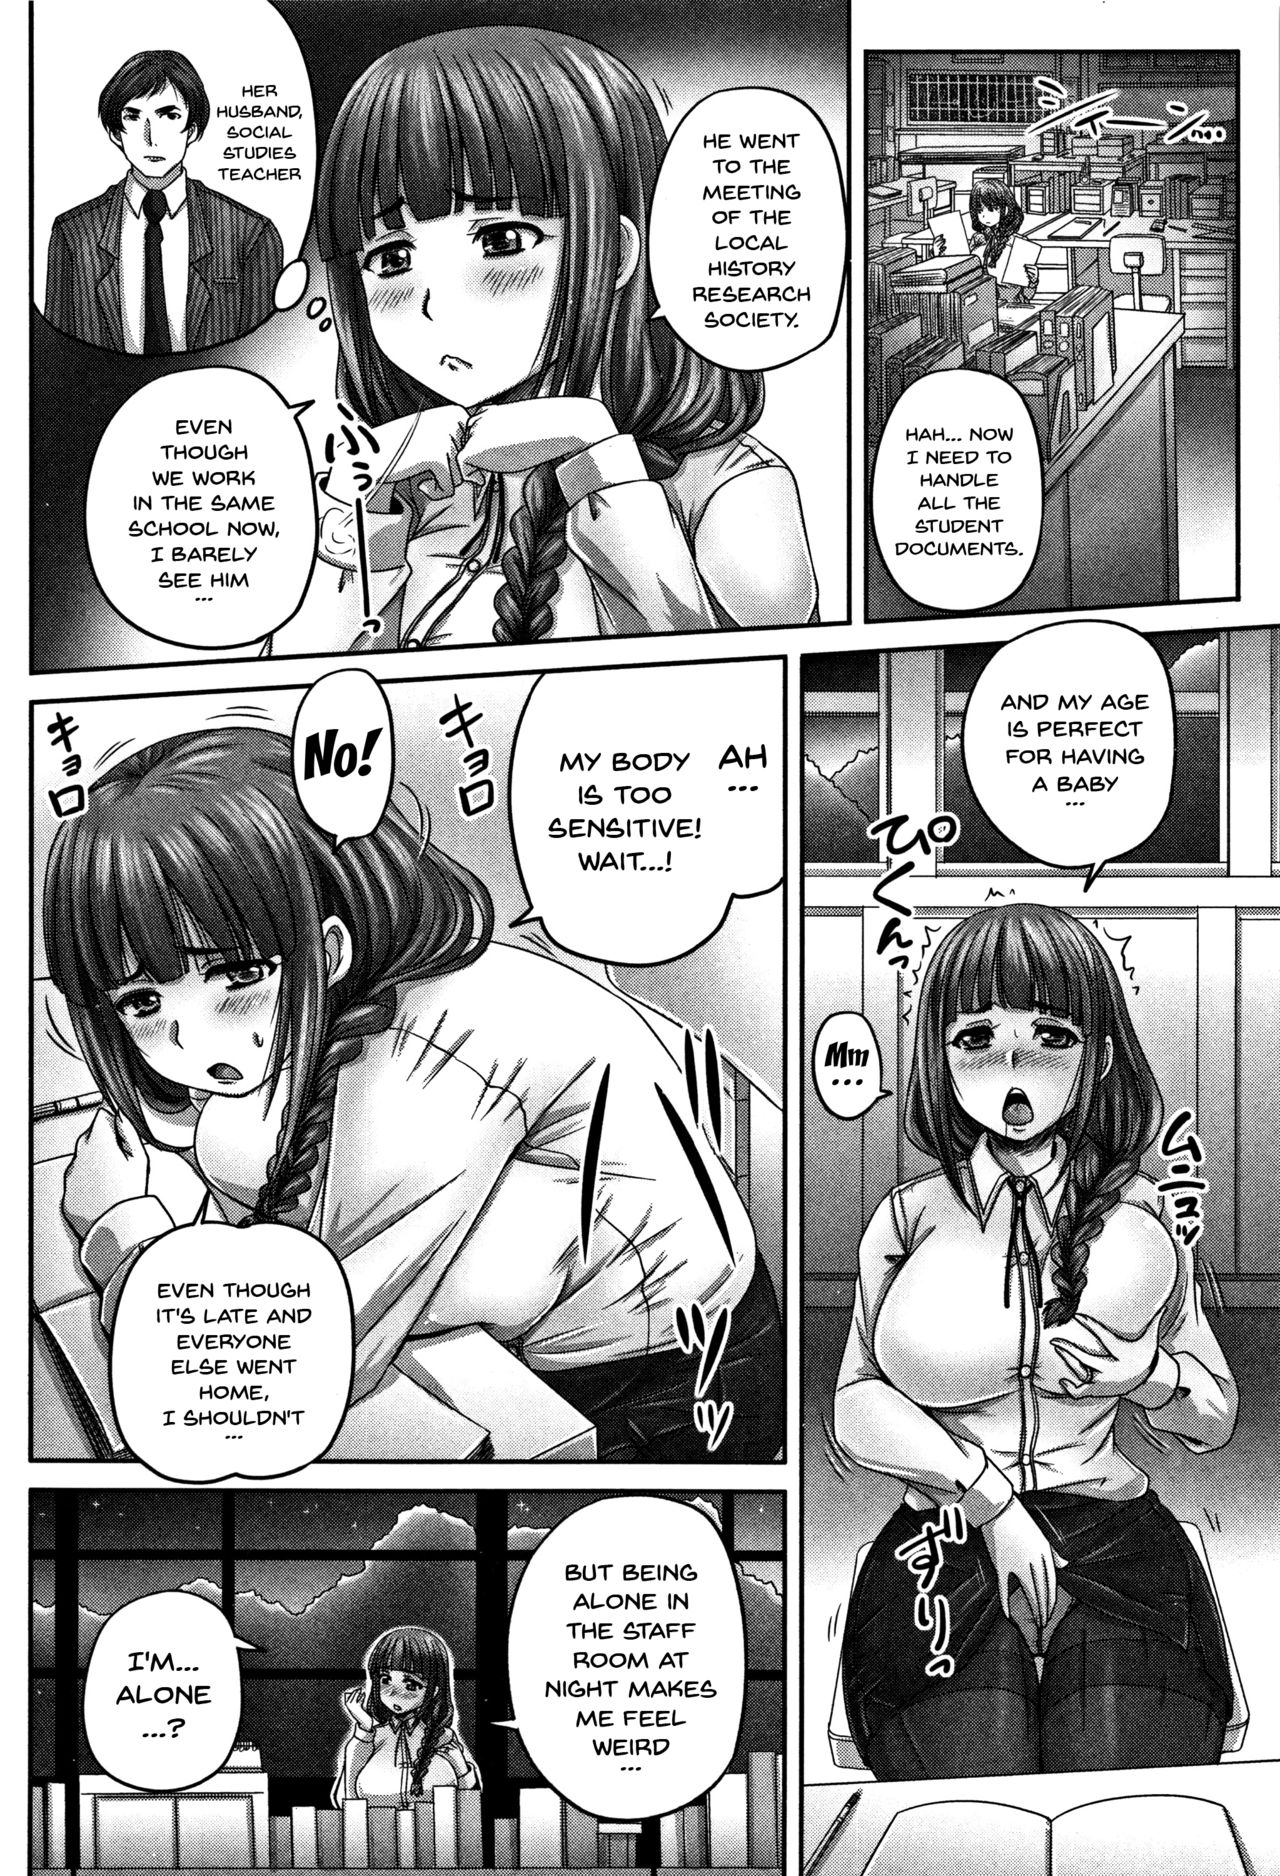 Nazi Pregnant Monster From Pregnant Pussy Bizarre Comics Anime